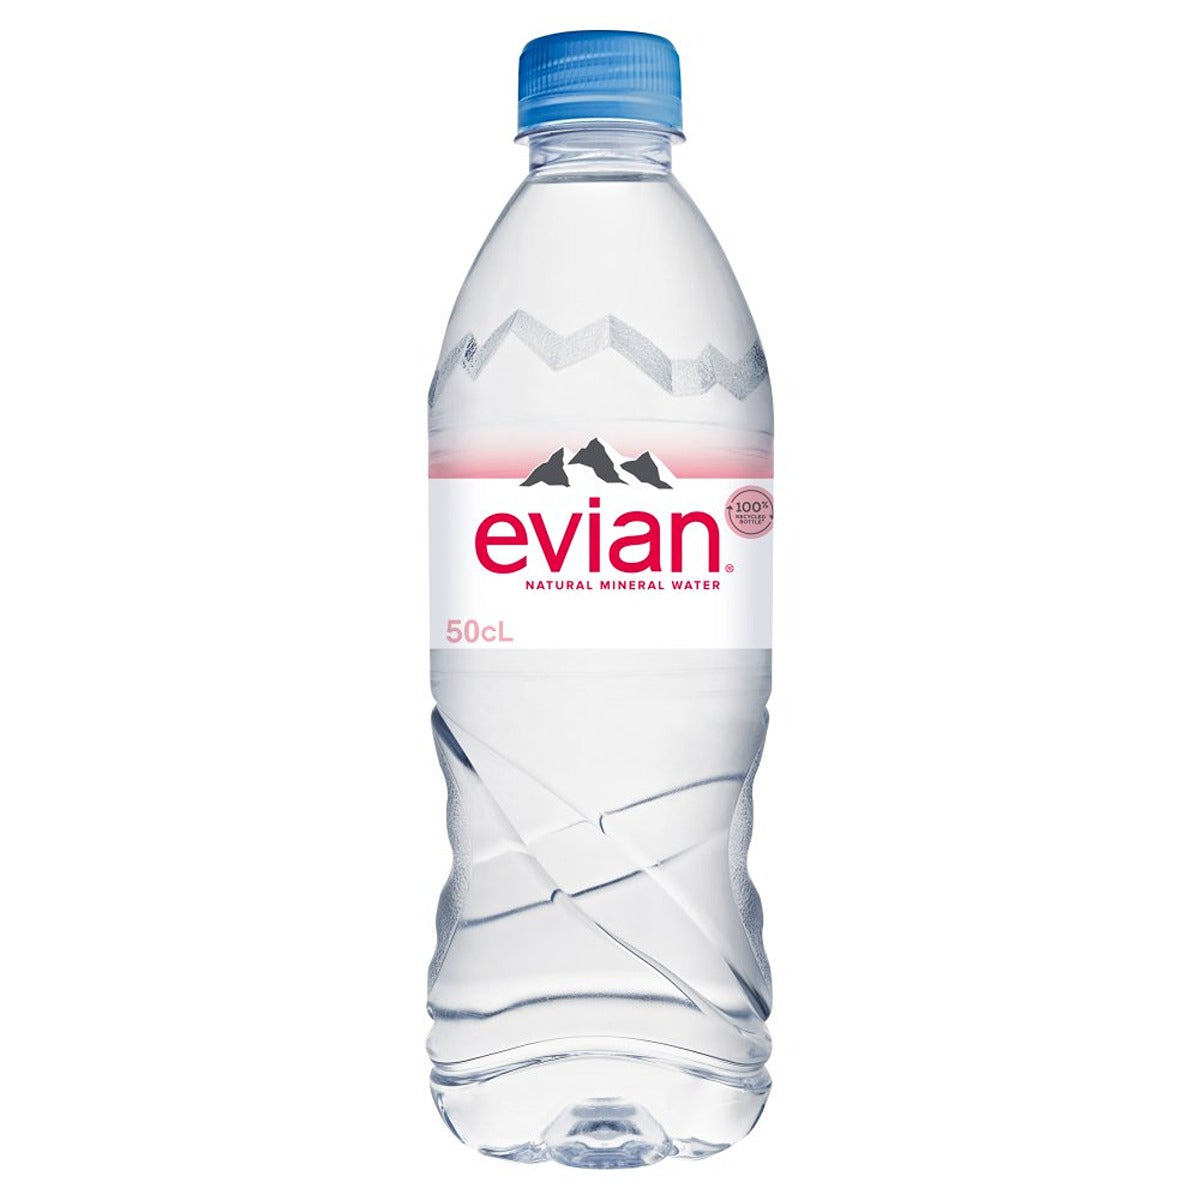 A bottle of Evian - Still Water - 0.5L on a white background.